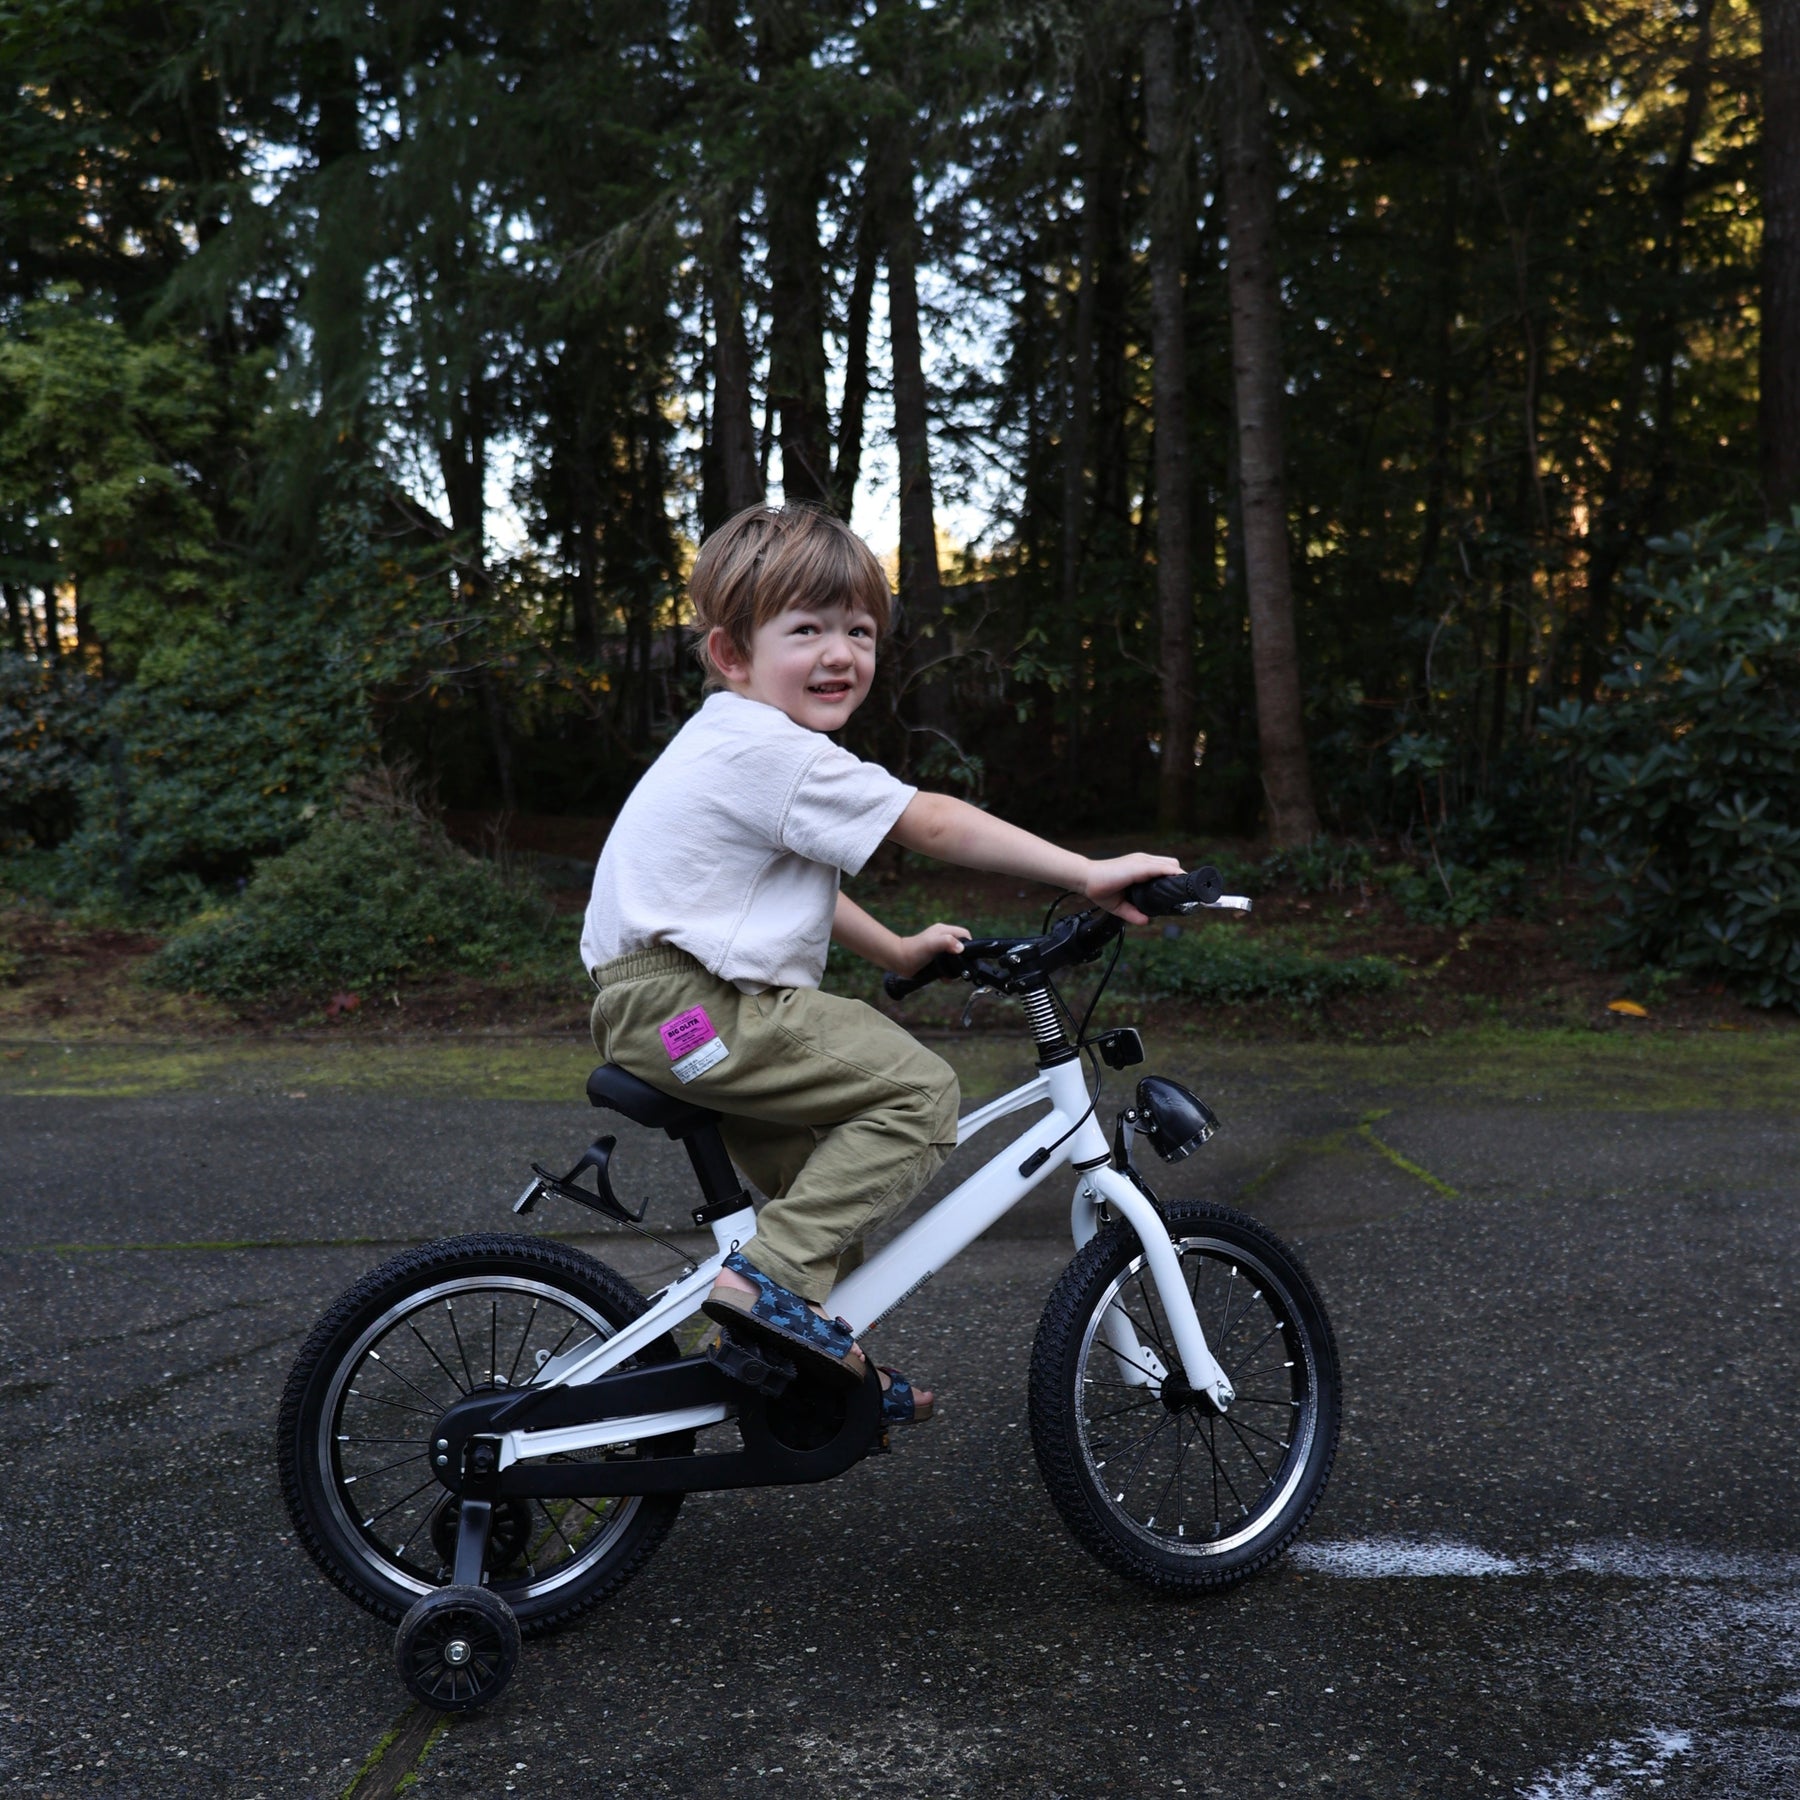 HARPPA Surgo Kids Bike: Ages 3-6, Sizes 12, 14 16 Inch, Perfect for Boys & Girls with Training Wheels